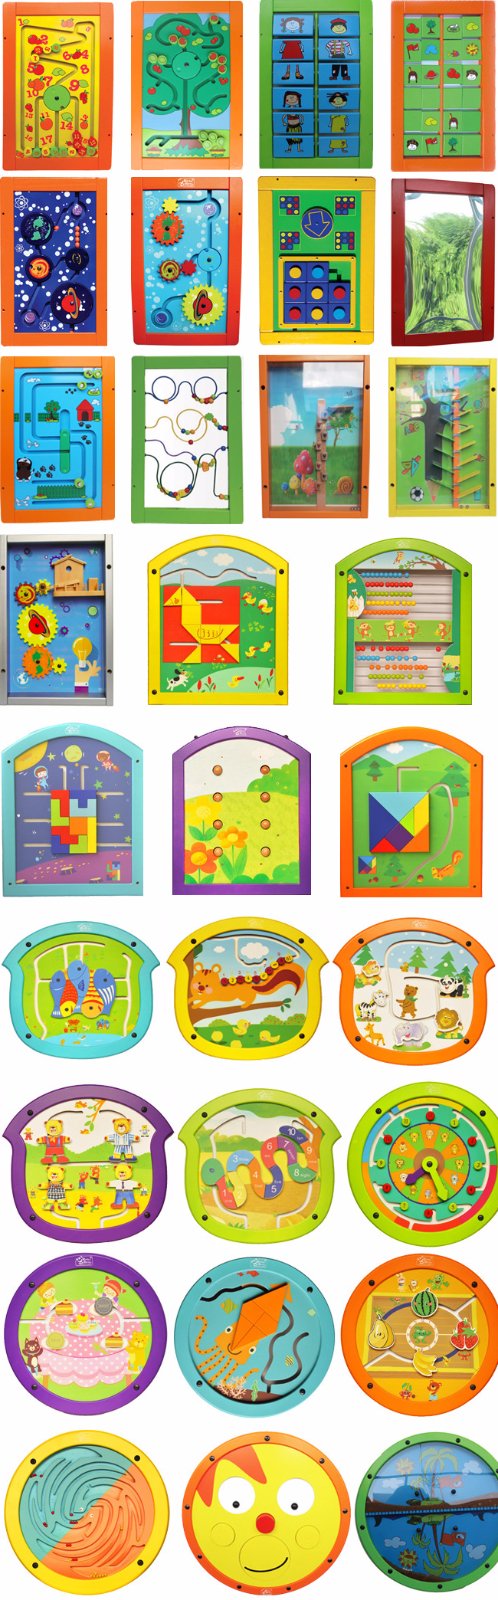 Wood Educational Wall Mounted Play Board for Children Learning